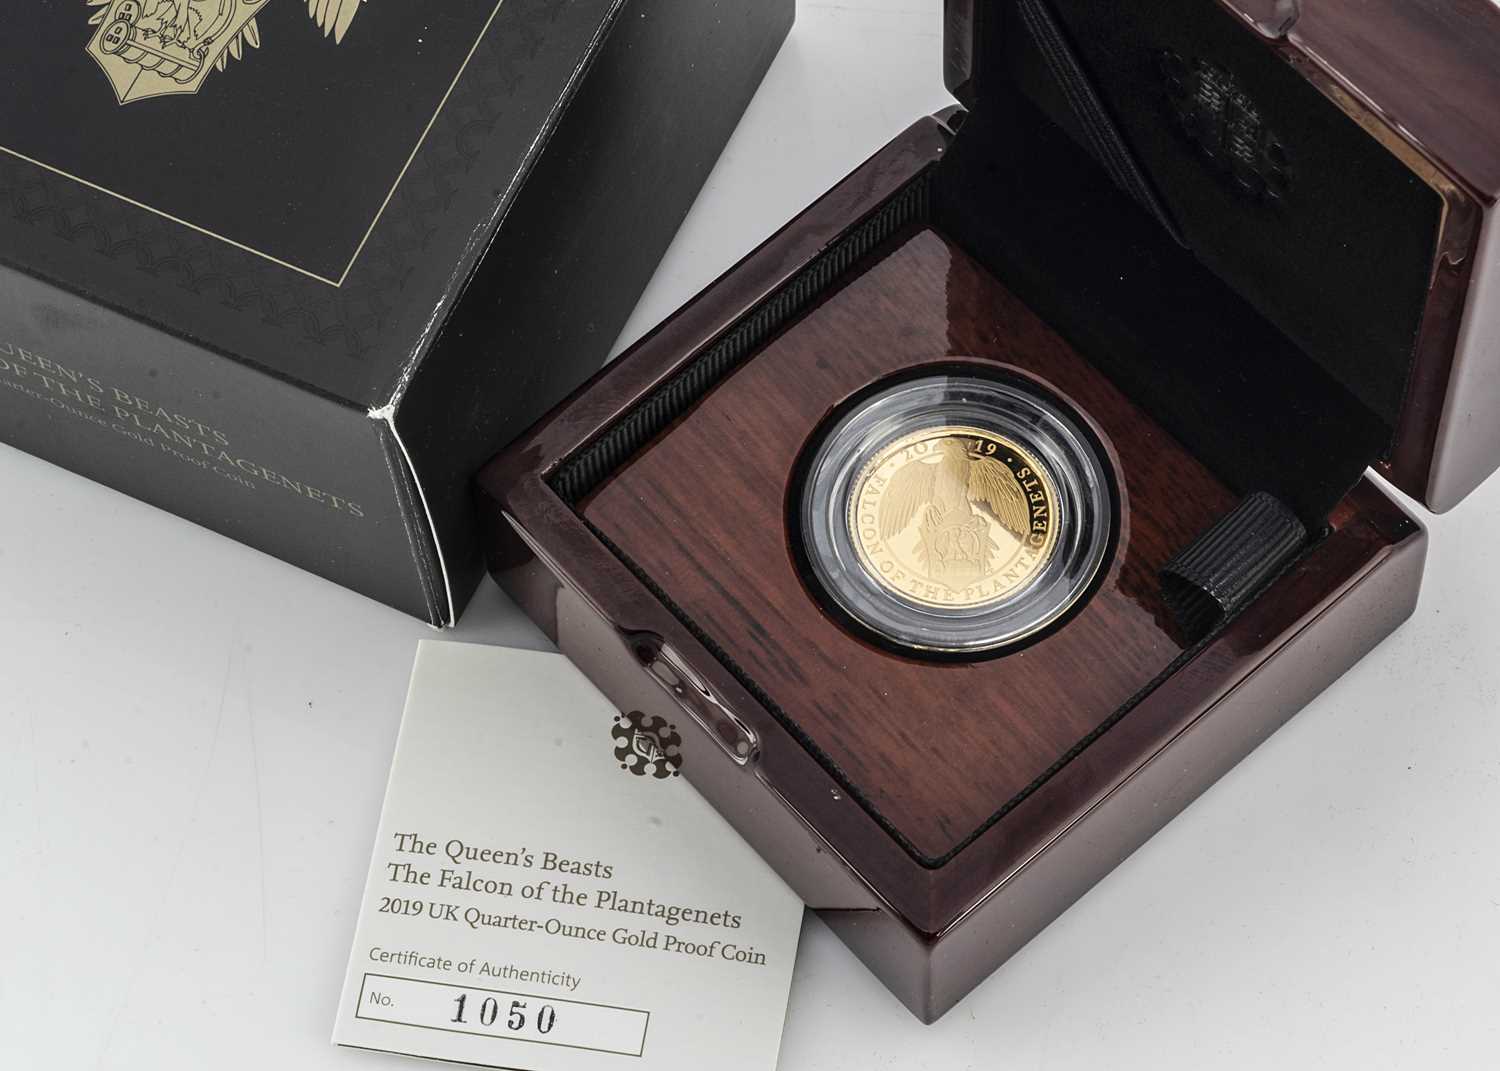 Lot 58 - A Royal Mint Elizabeth II The Queen's Beasts UK Quarter Ounce Gold Proof Coin